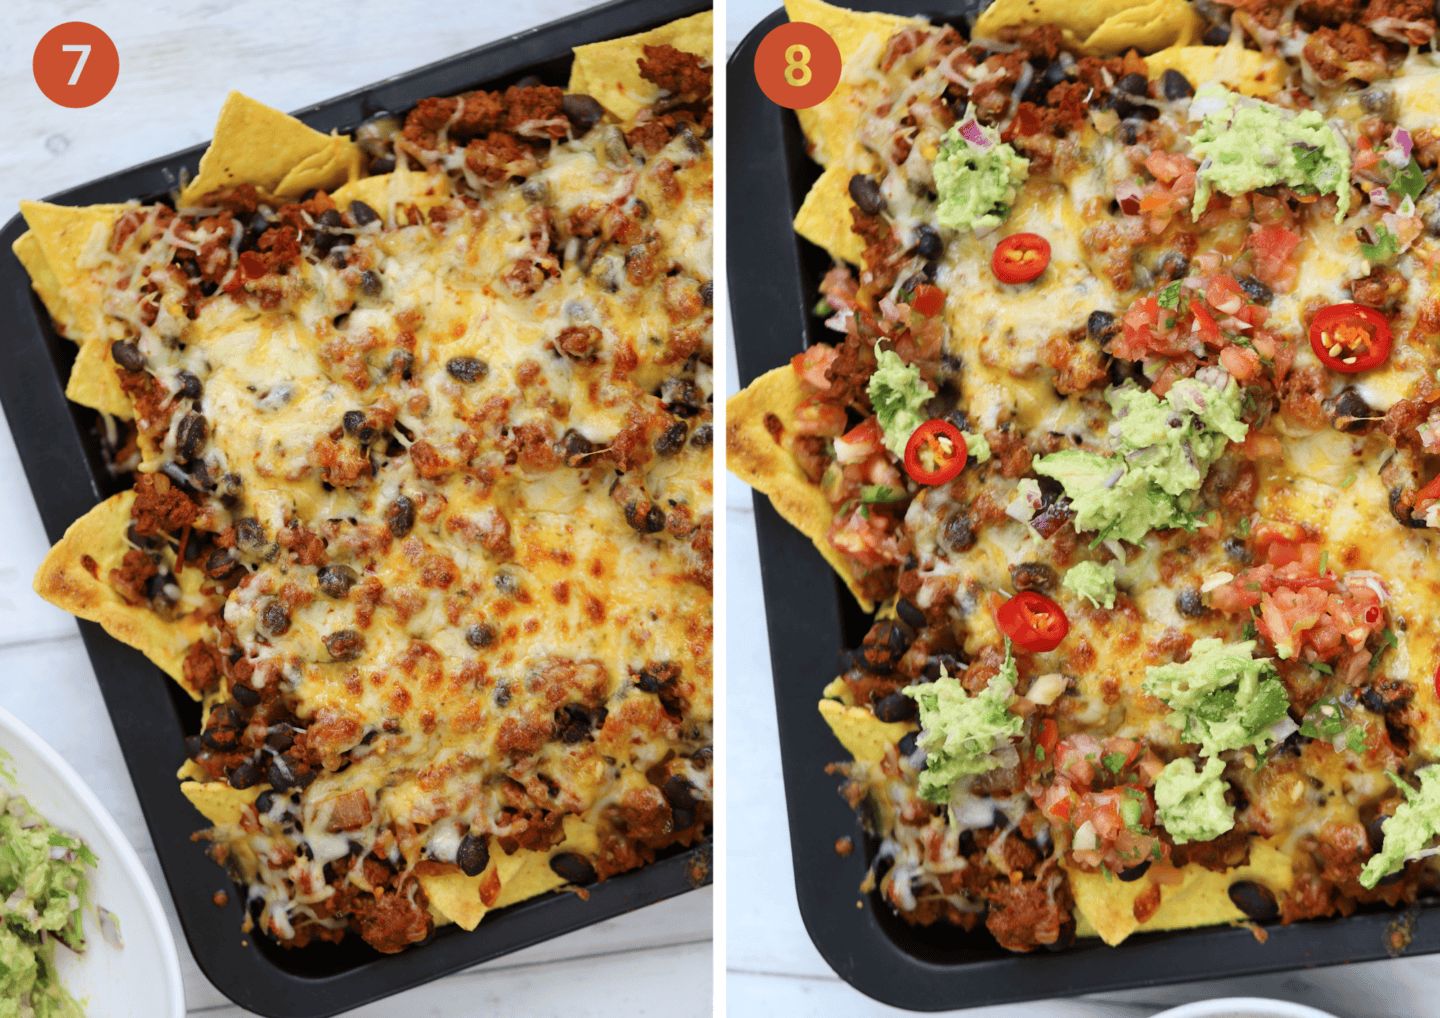 The nachos before and after topping with guacamole and salsa.